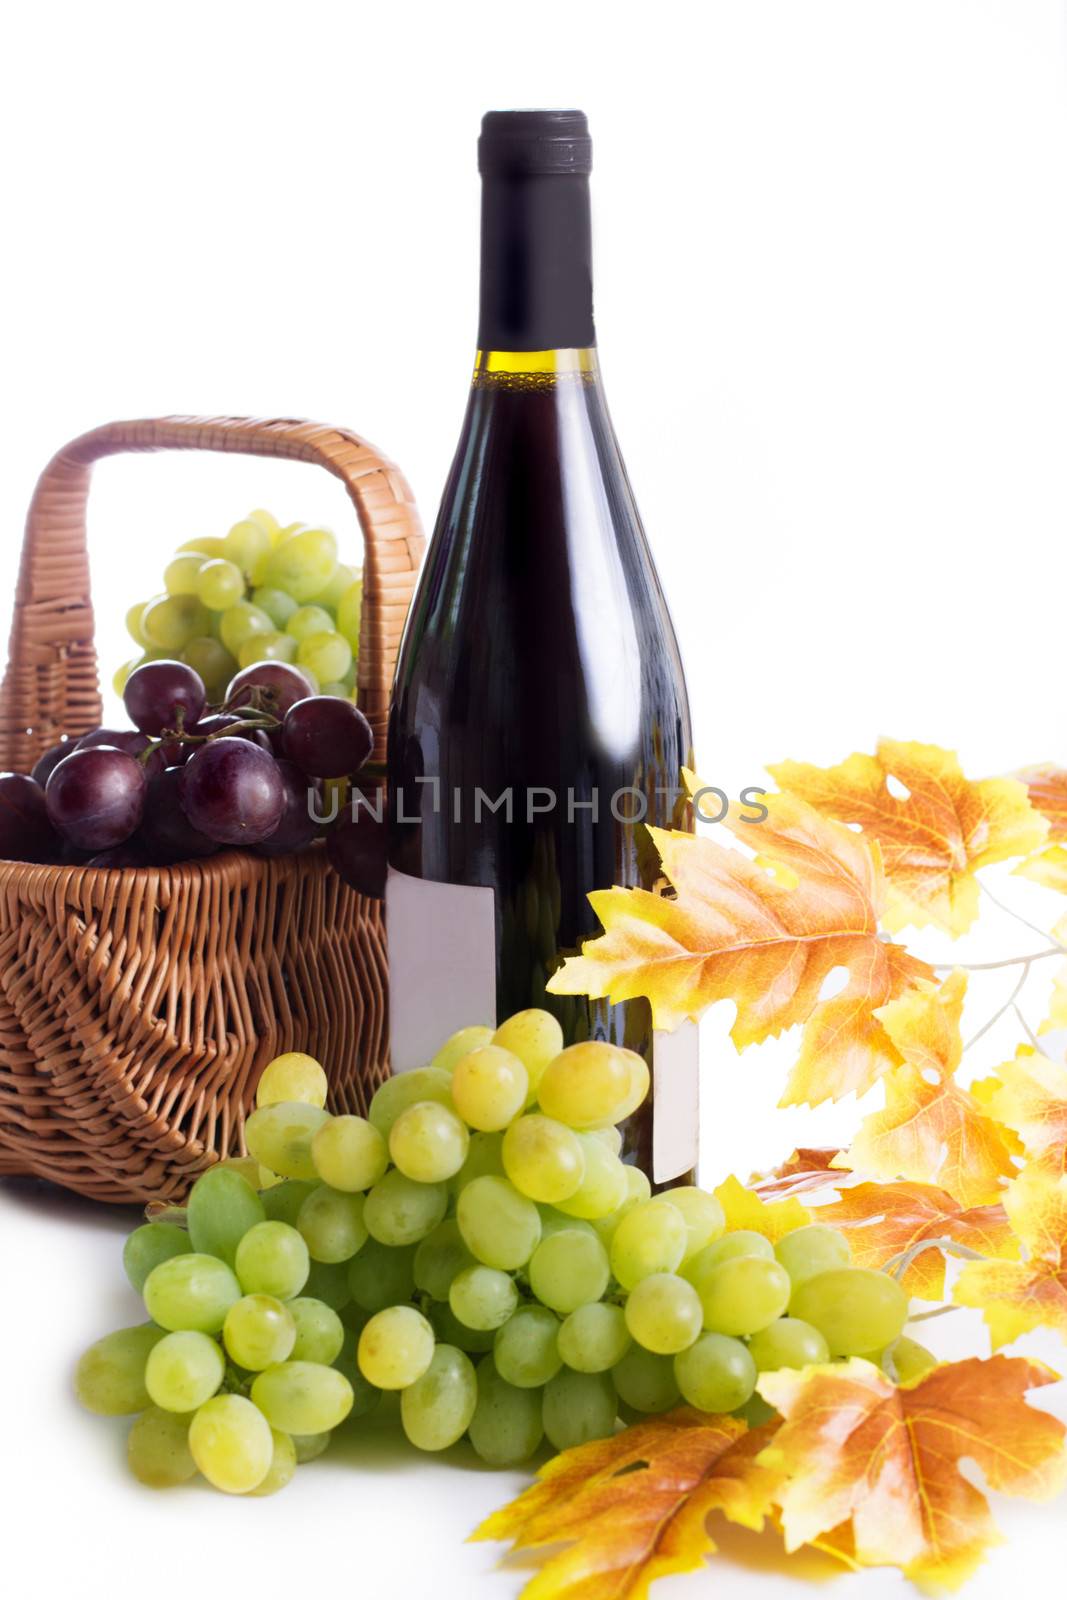 Ripe red and dark grapes and wine in basket isolated on white